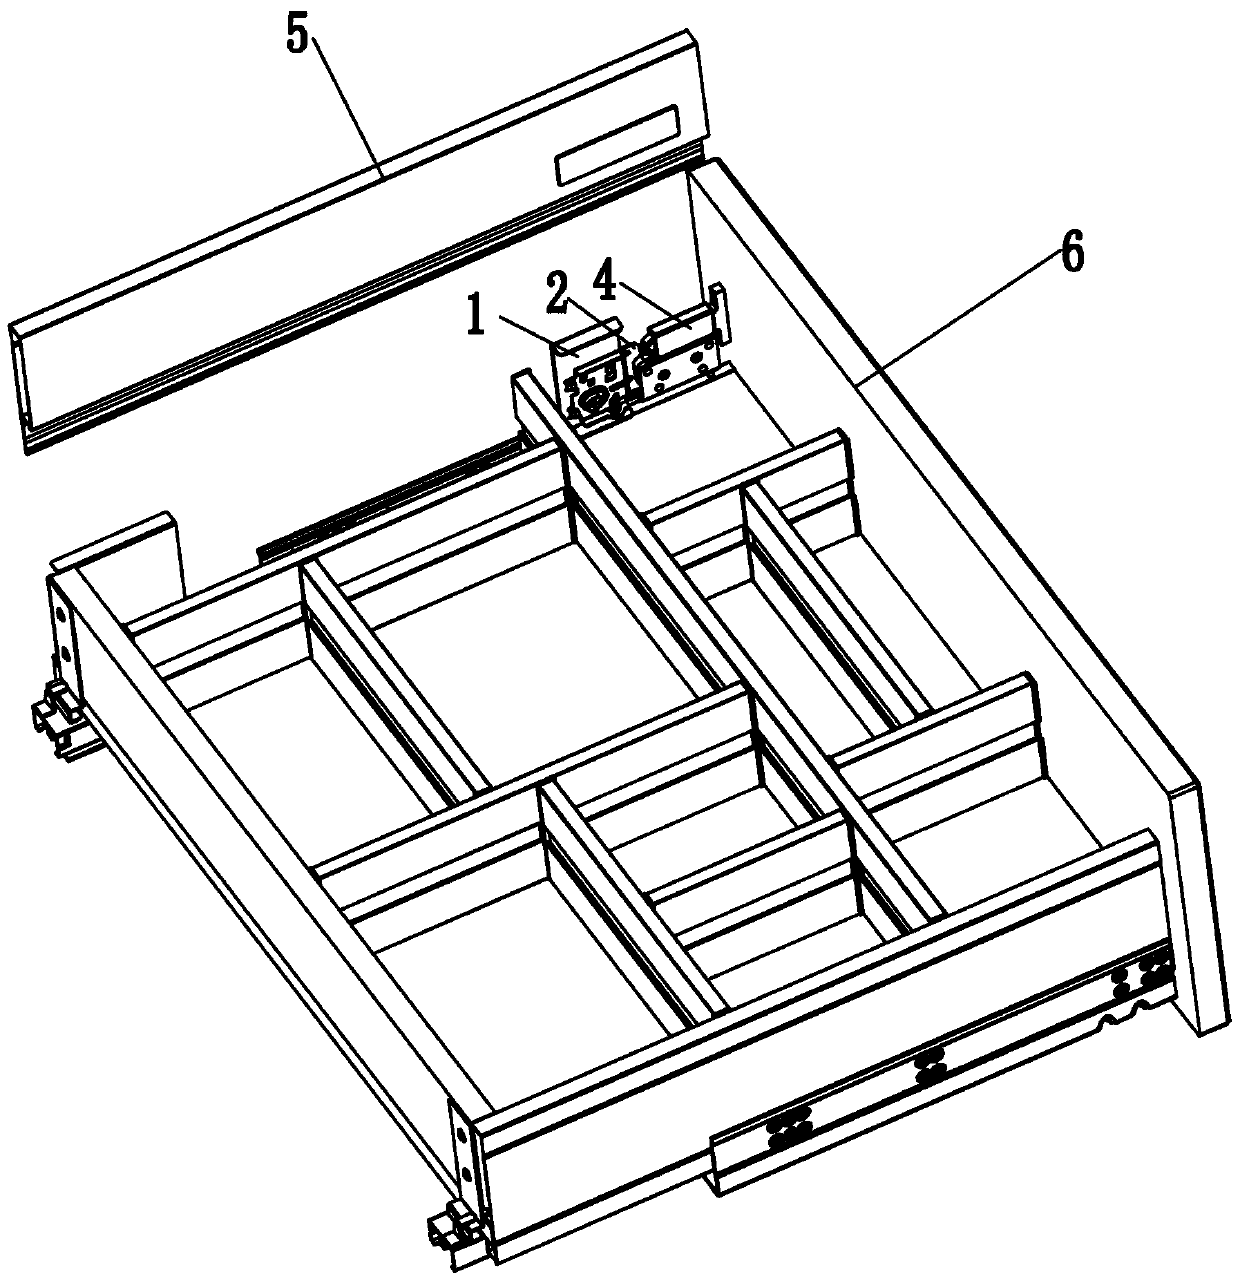 Connection structure between drawer side panels and panels